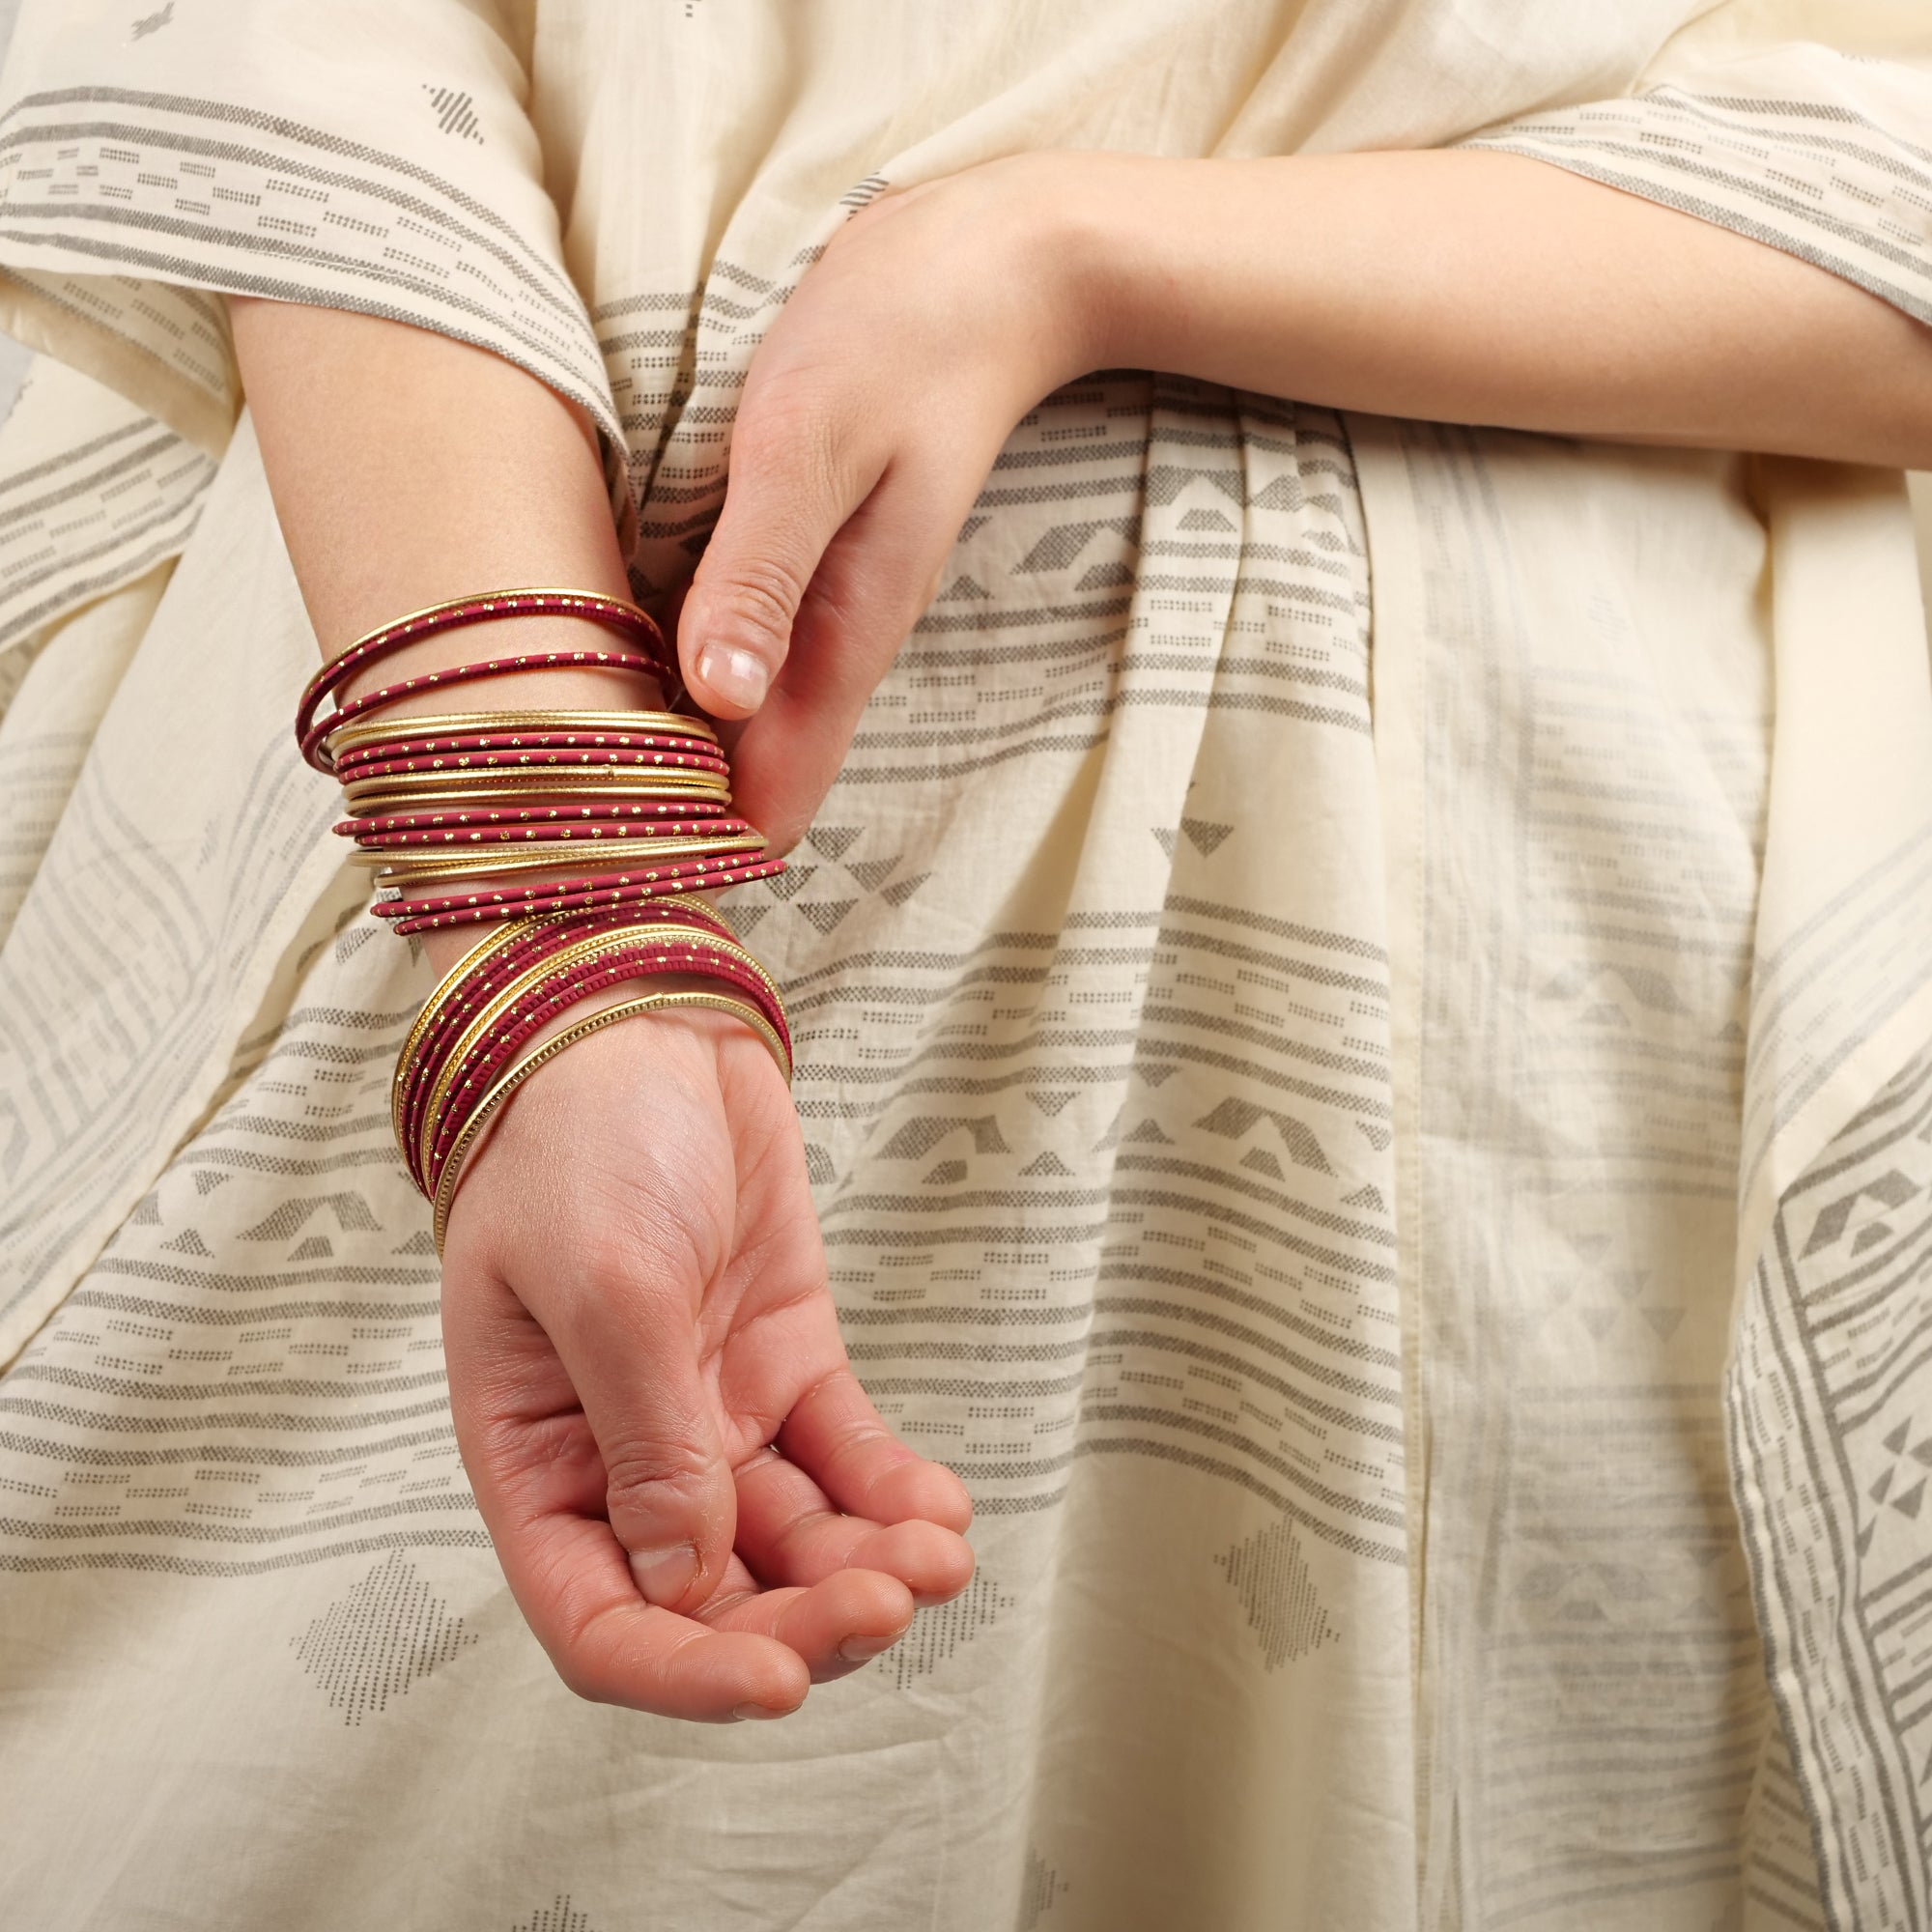 Majestic Maroon and Gold Bangle Stack